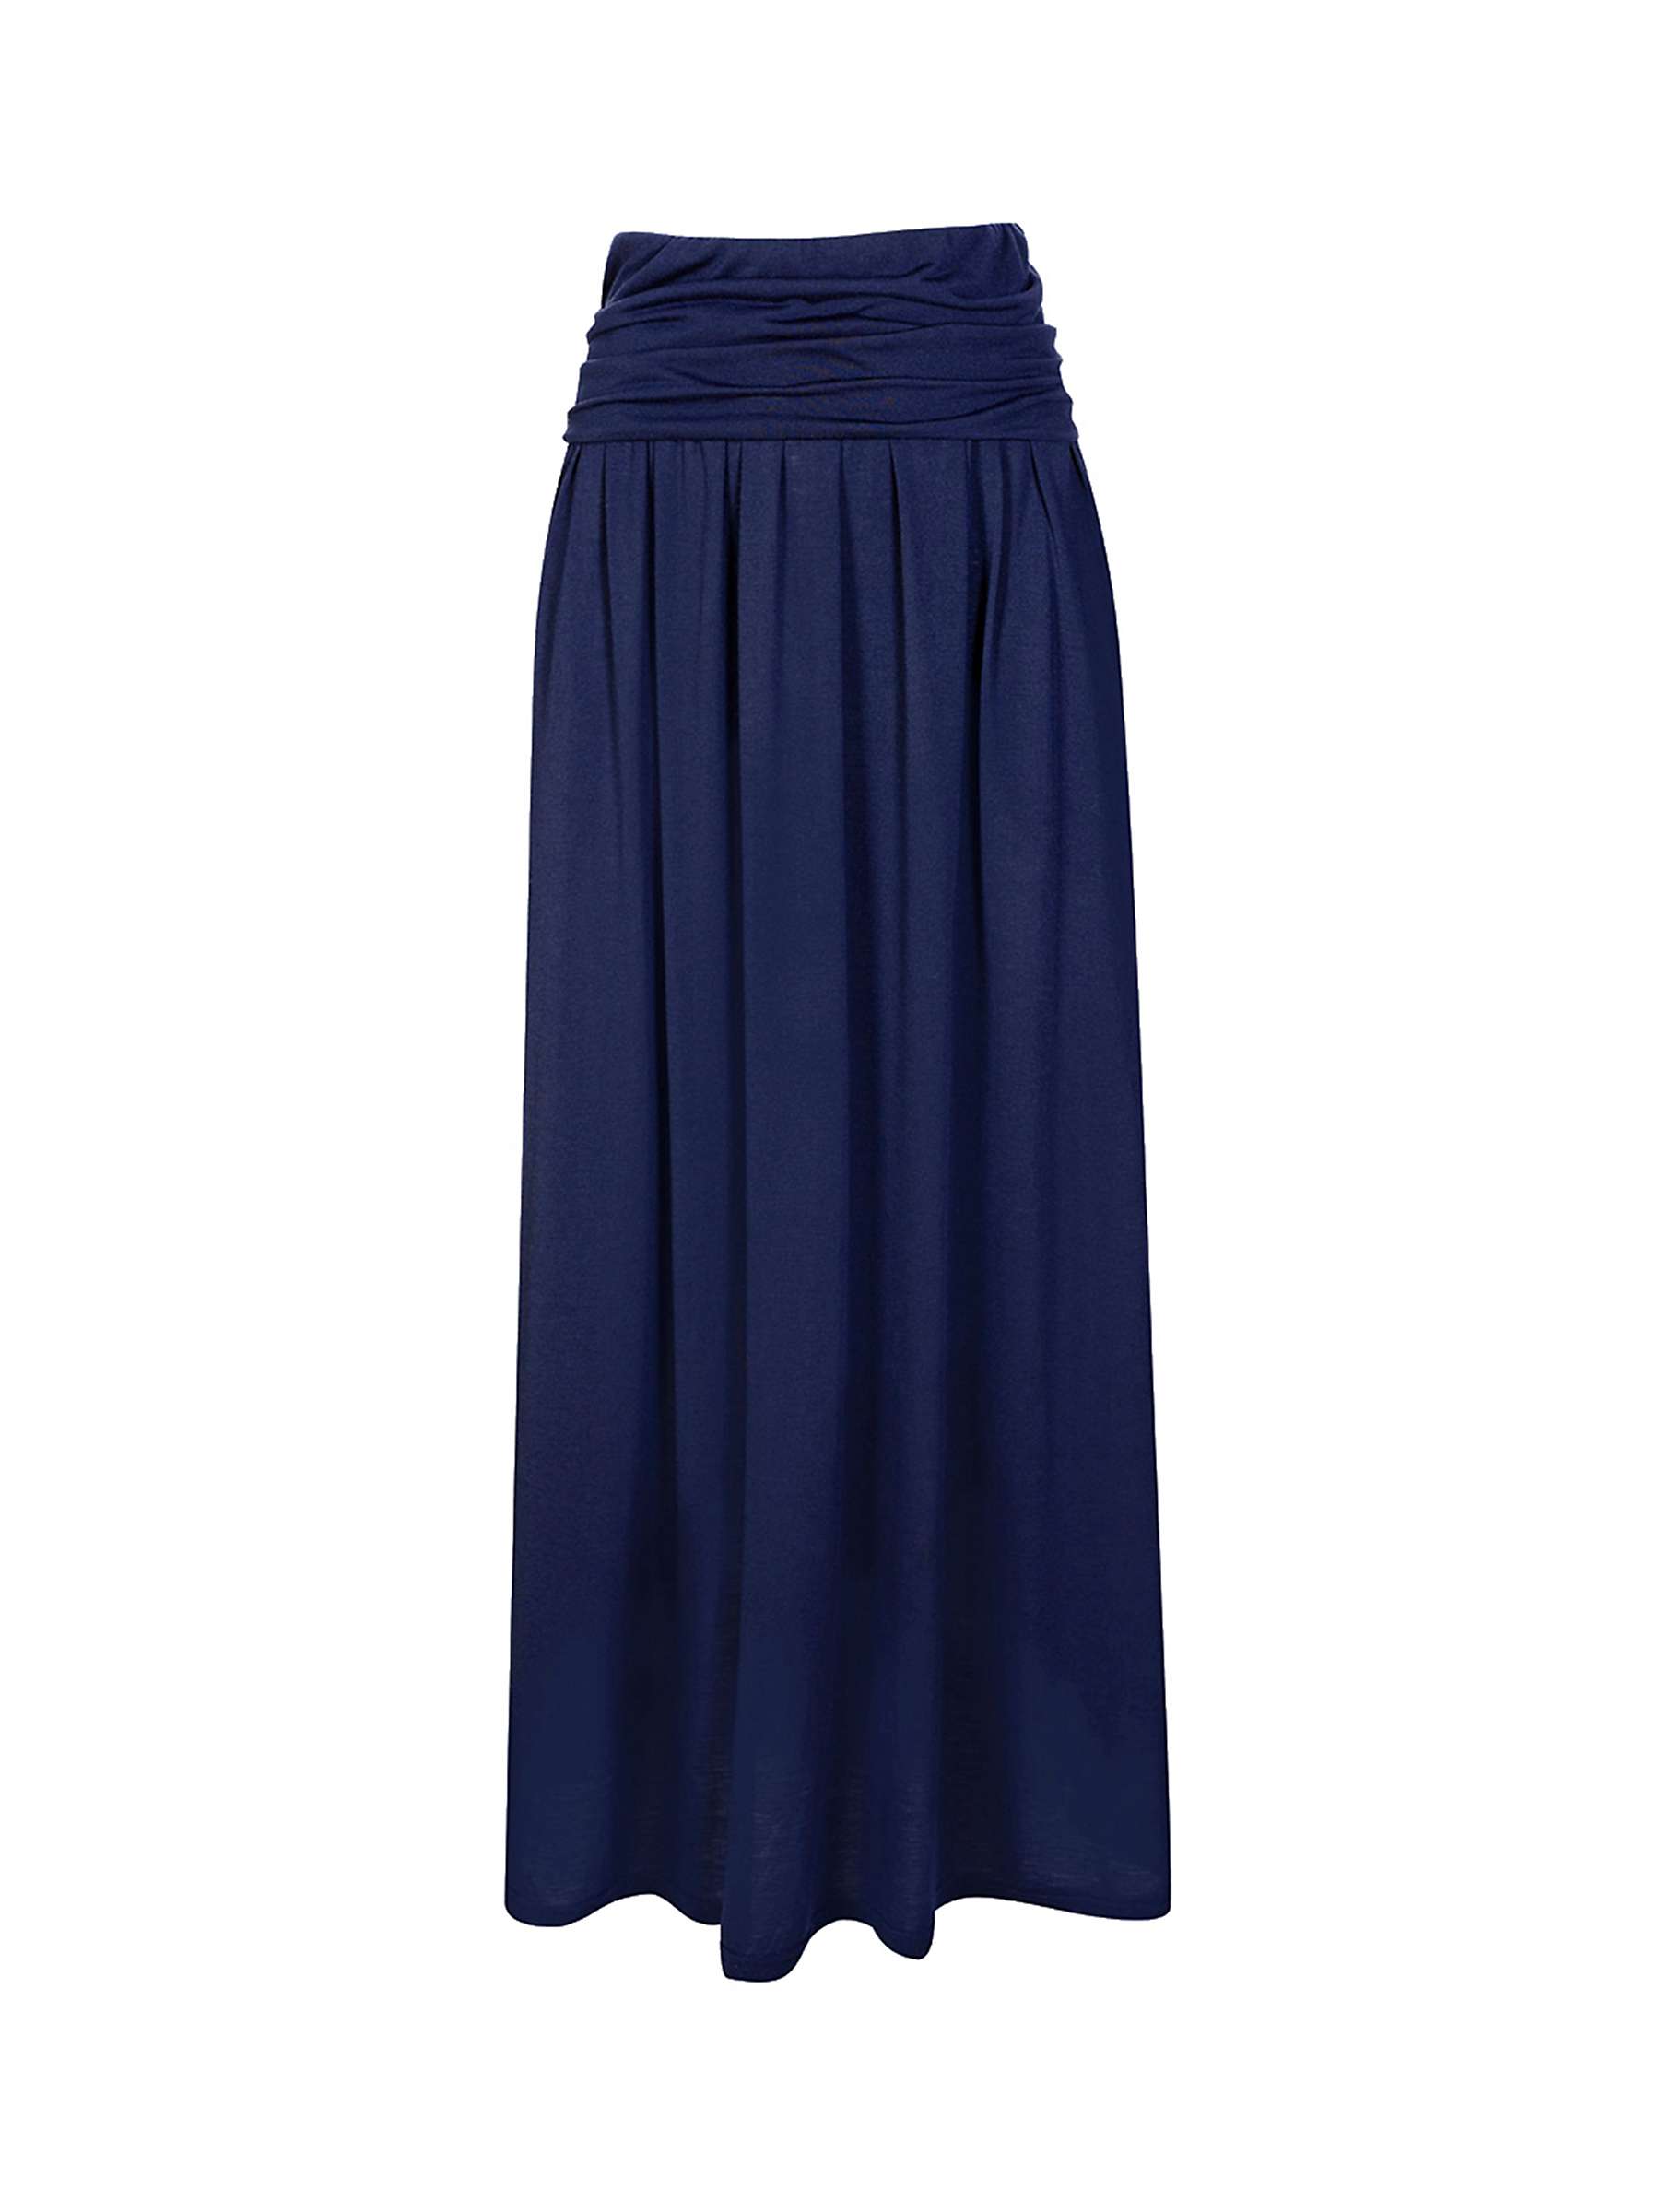 Buy HotSquash Luxury Roll Top Maxi Skirt Online at johnlewis.com